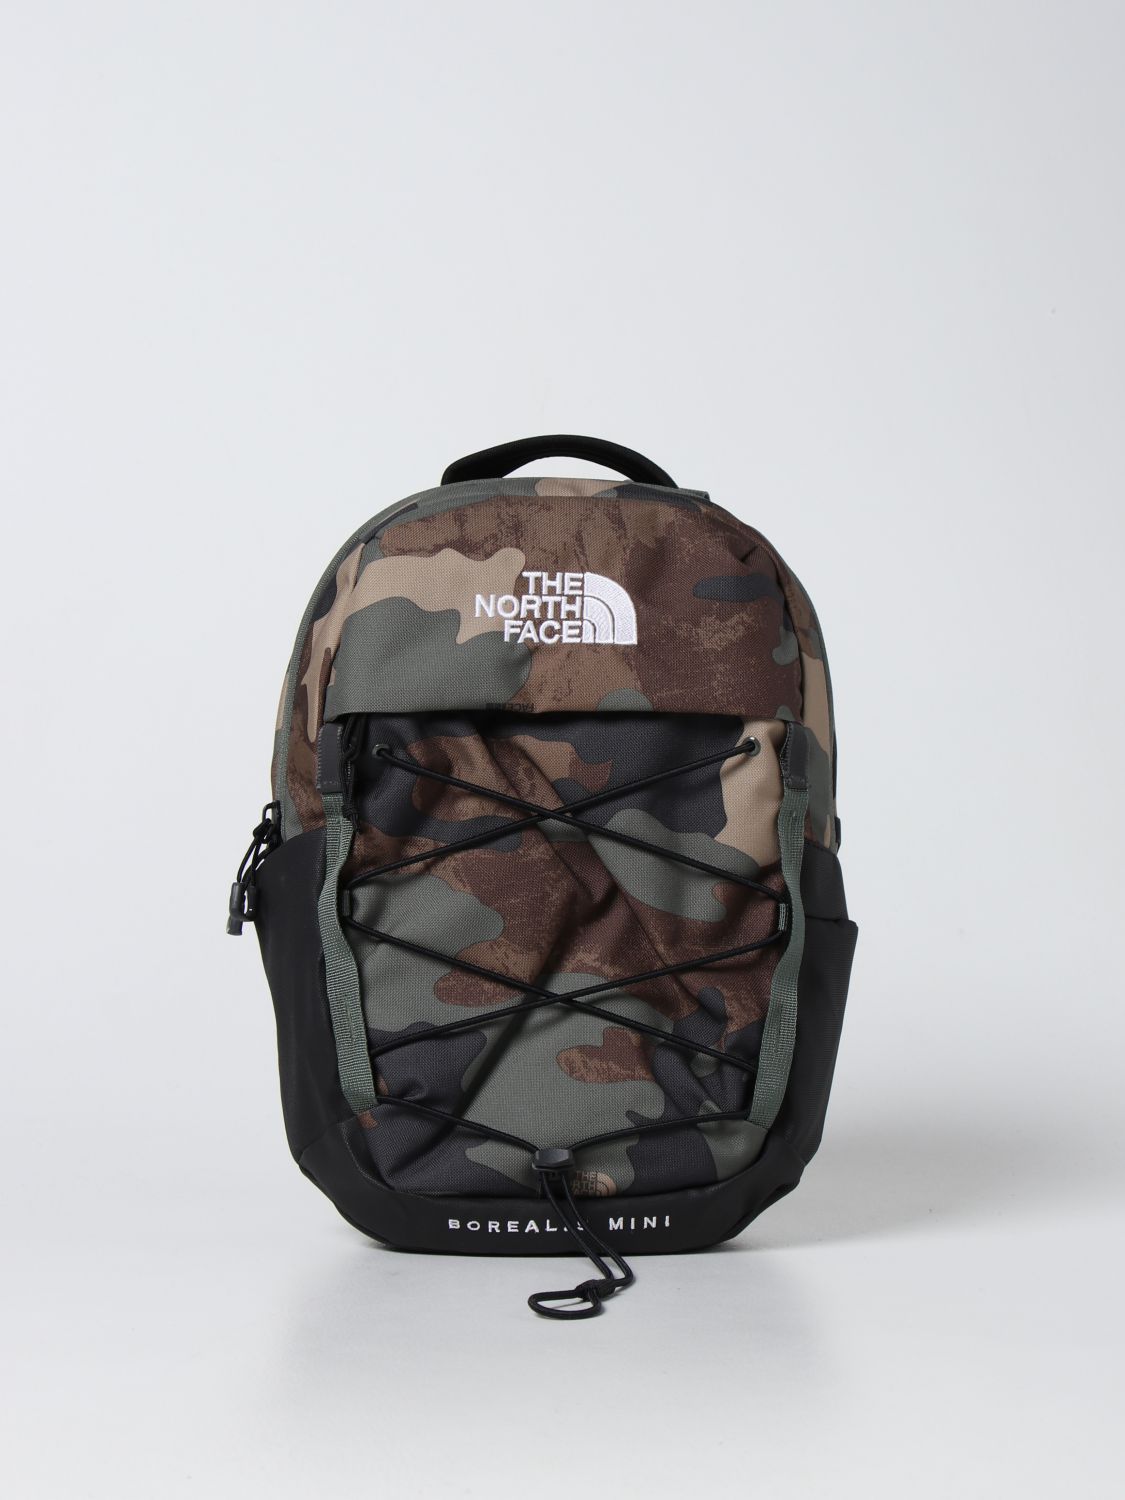 Rucksack The North Face: Rucksack herren The North Face military 1